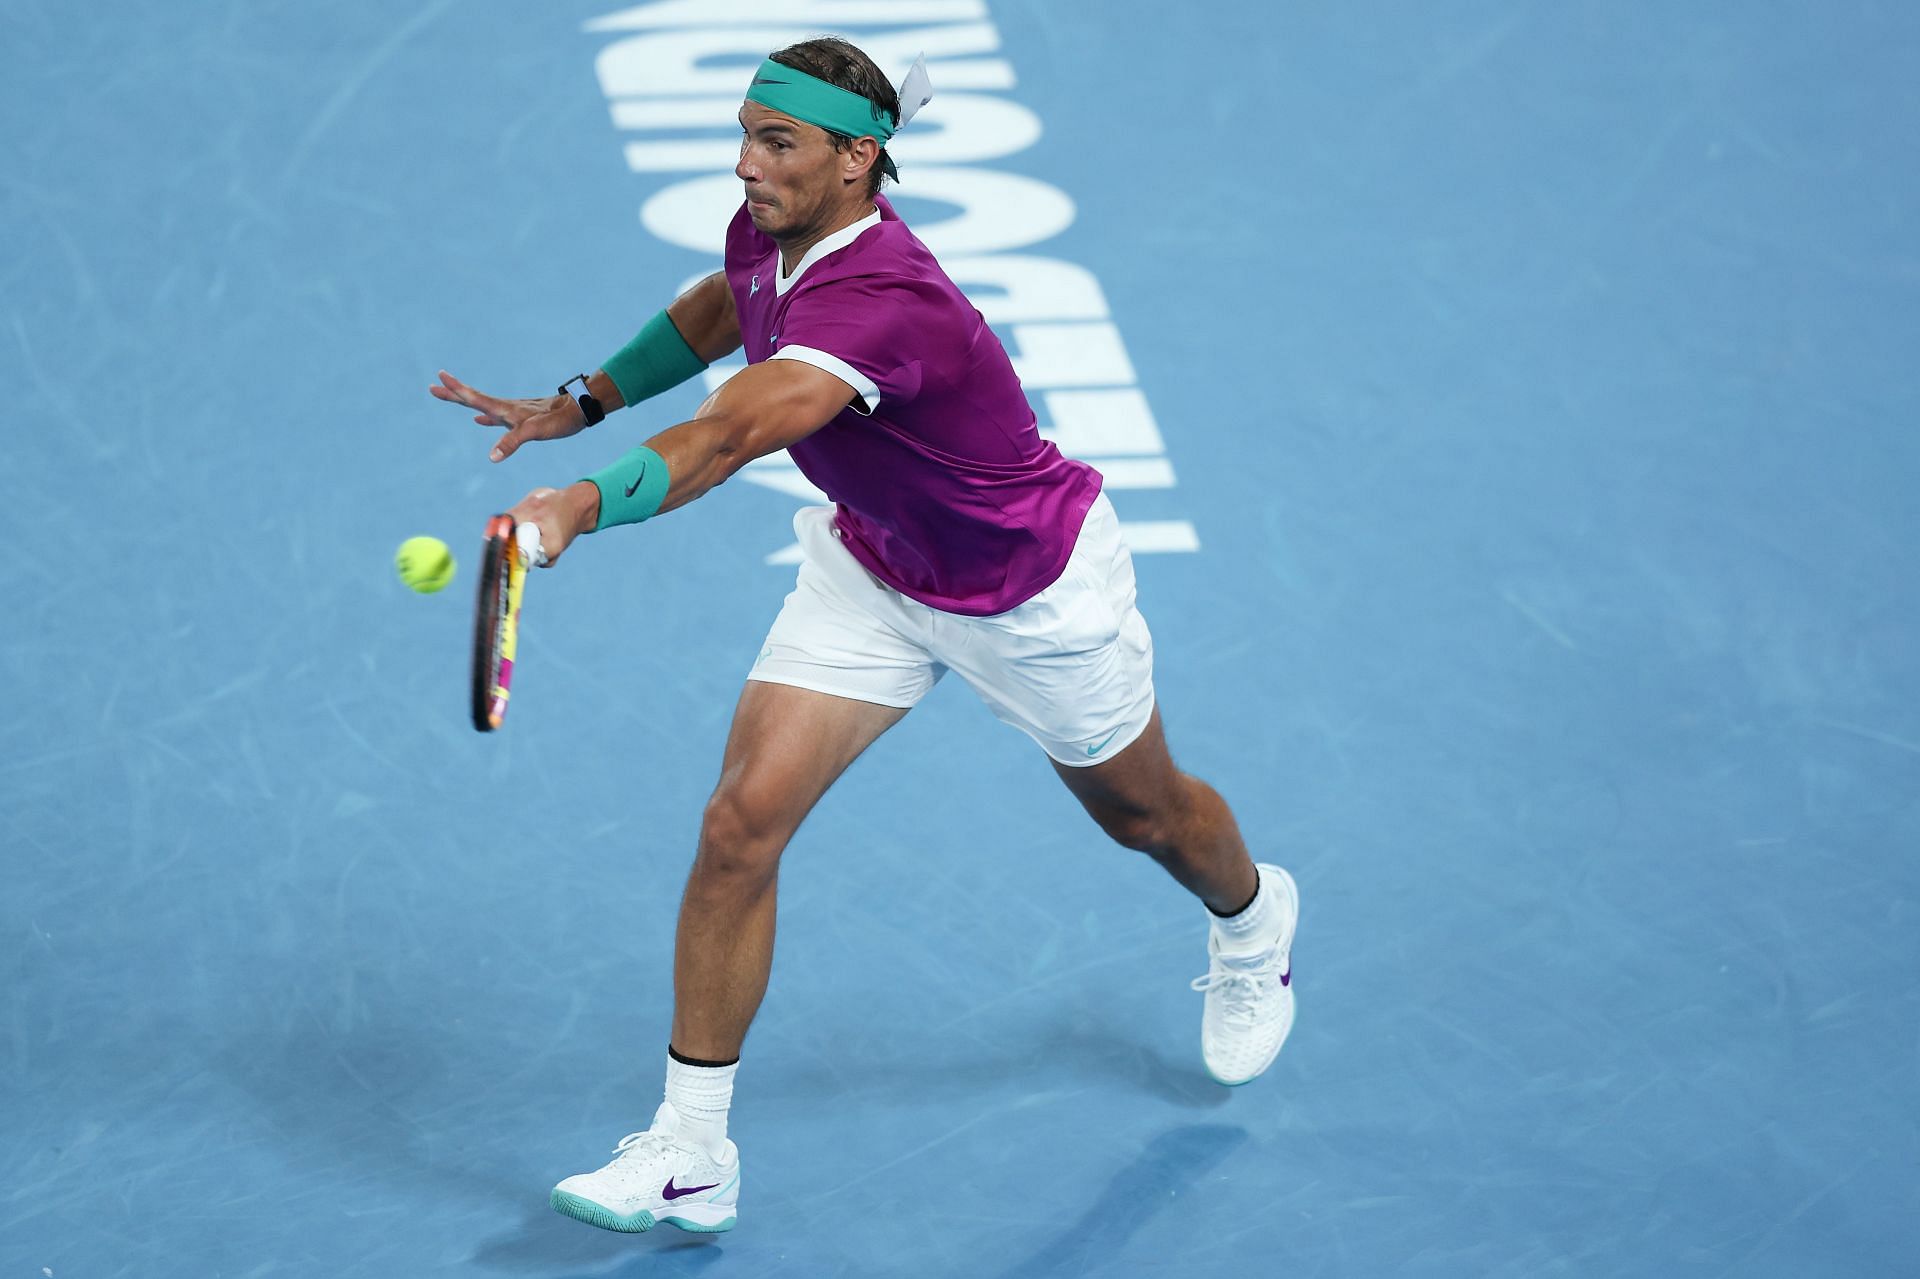 Nadal put in a dominant display against Berrettini to reach his sixth Australian Open final